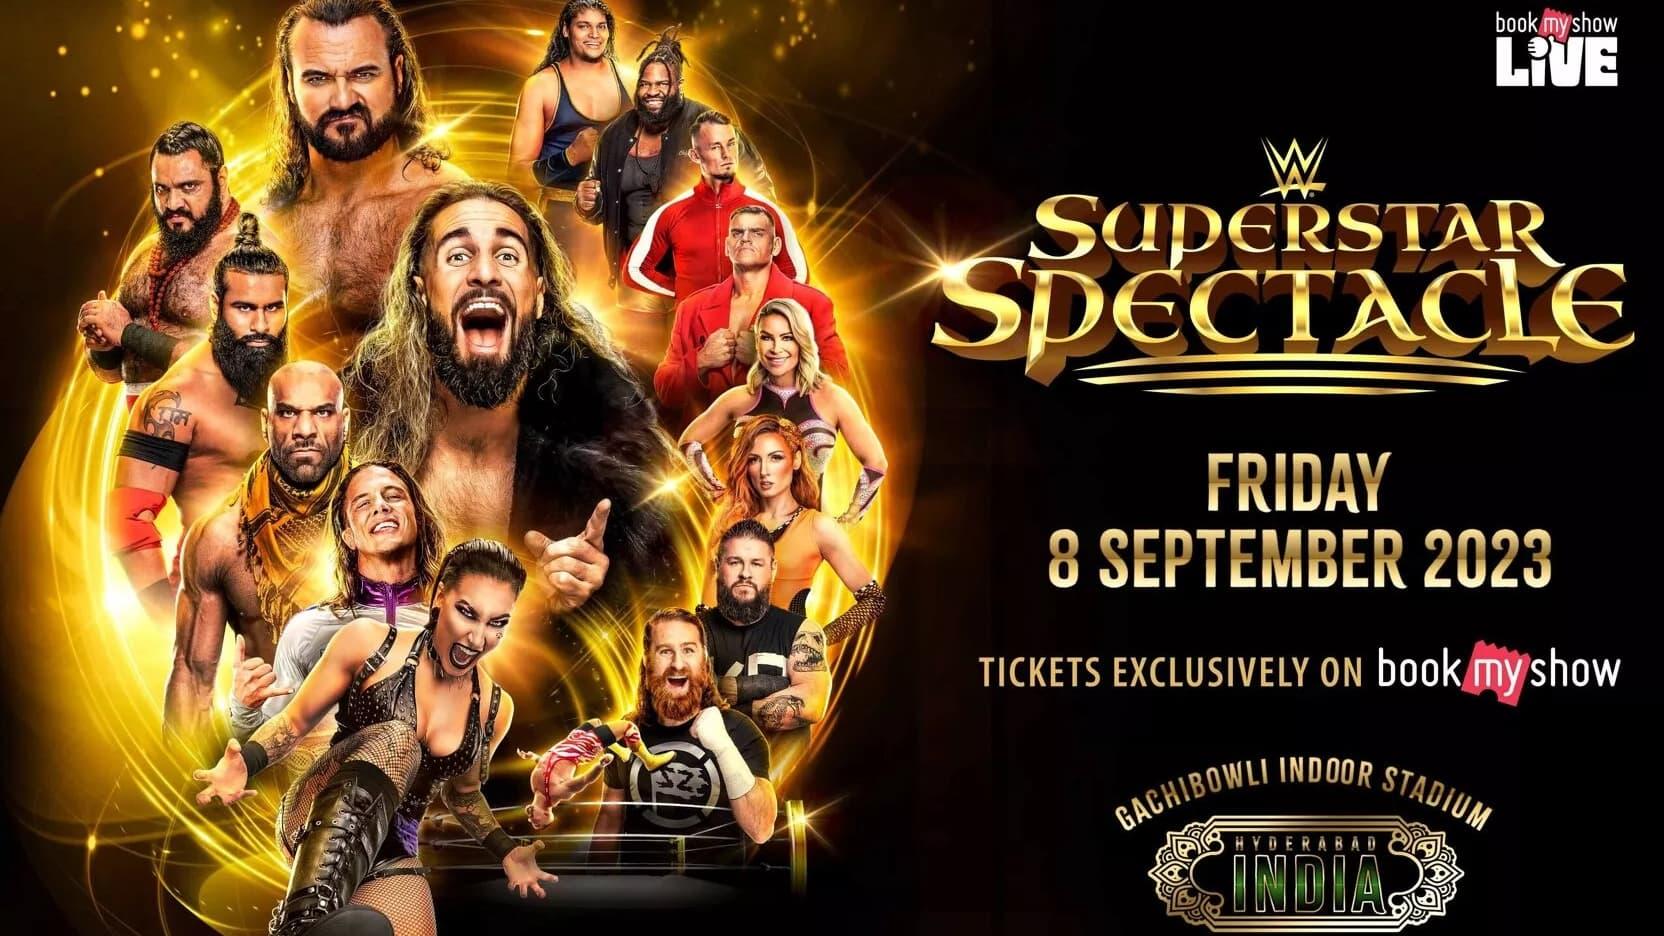 WWE Superstar Spectacle 2023 backdrop